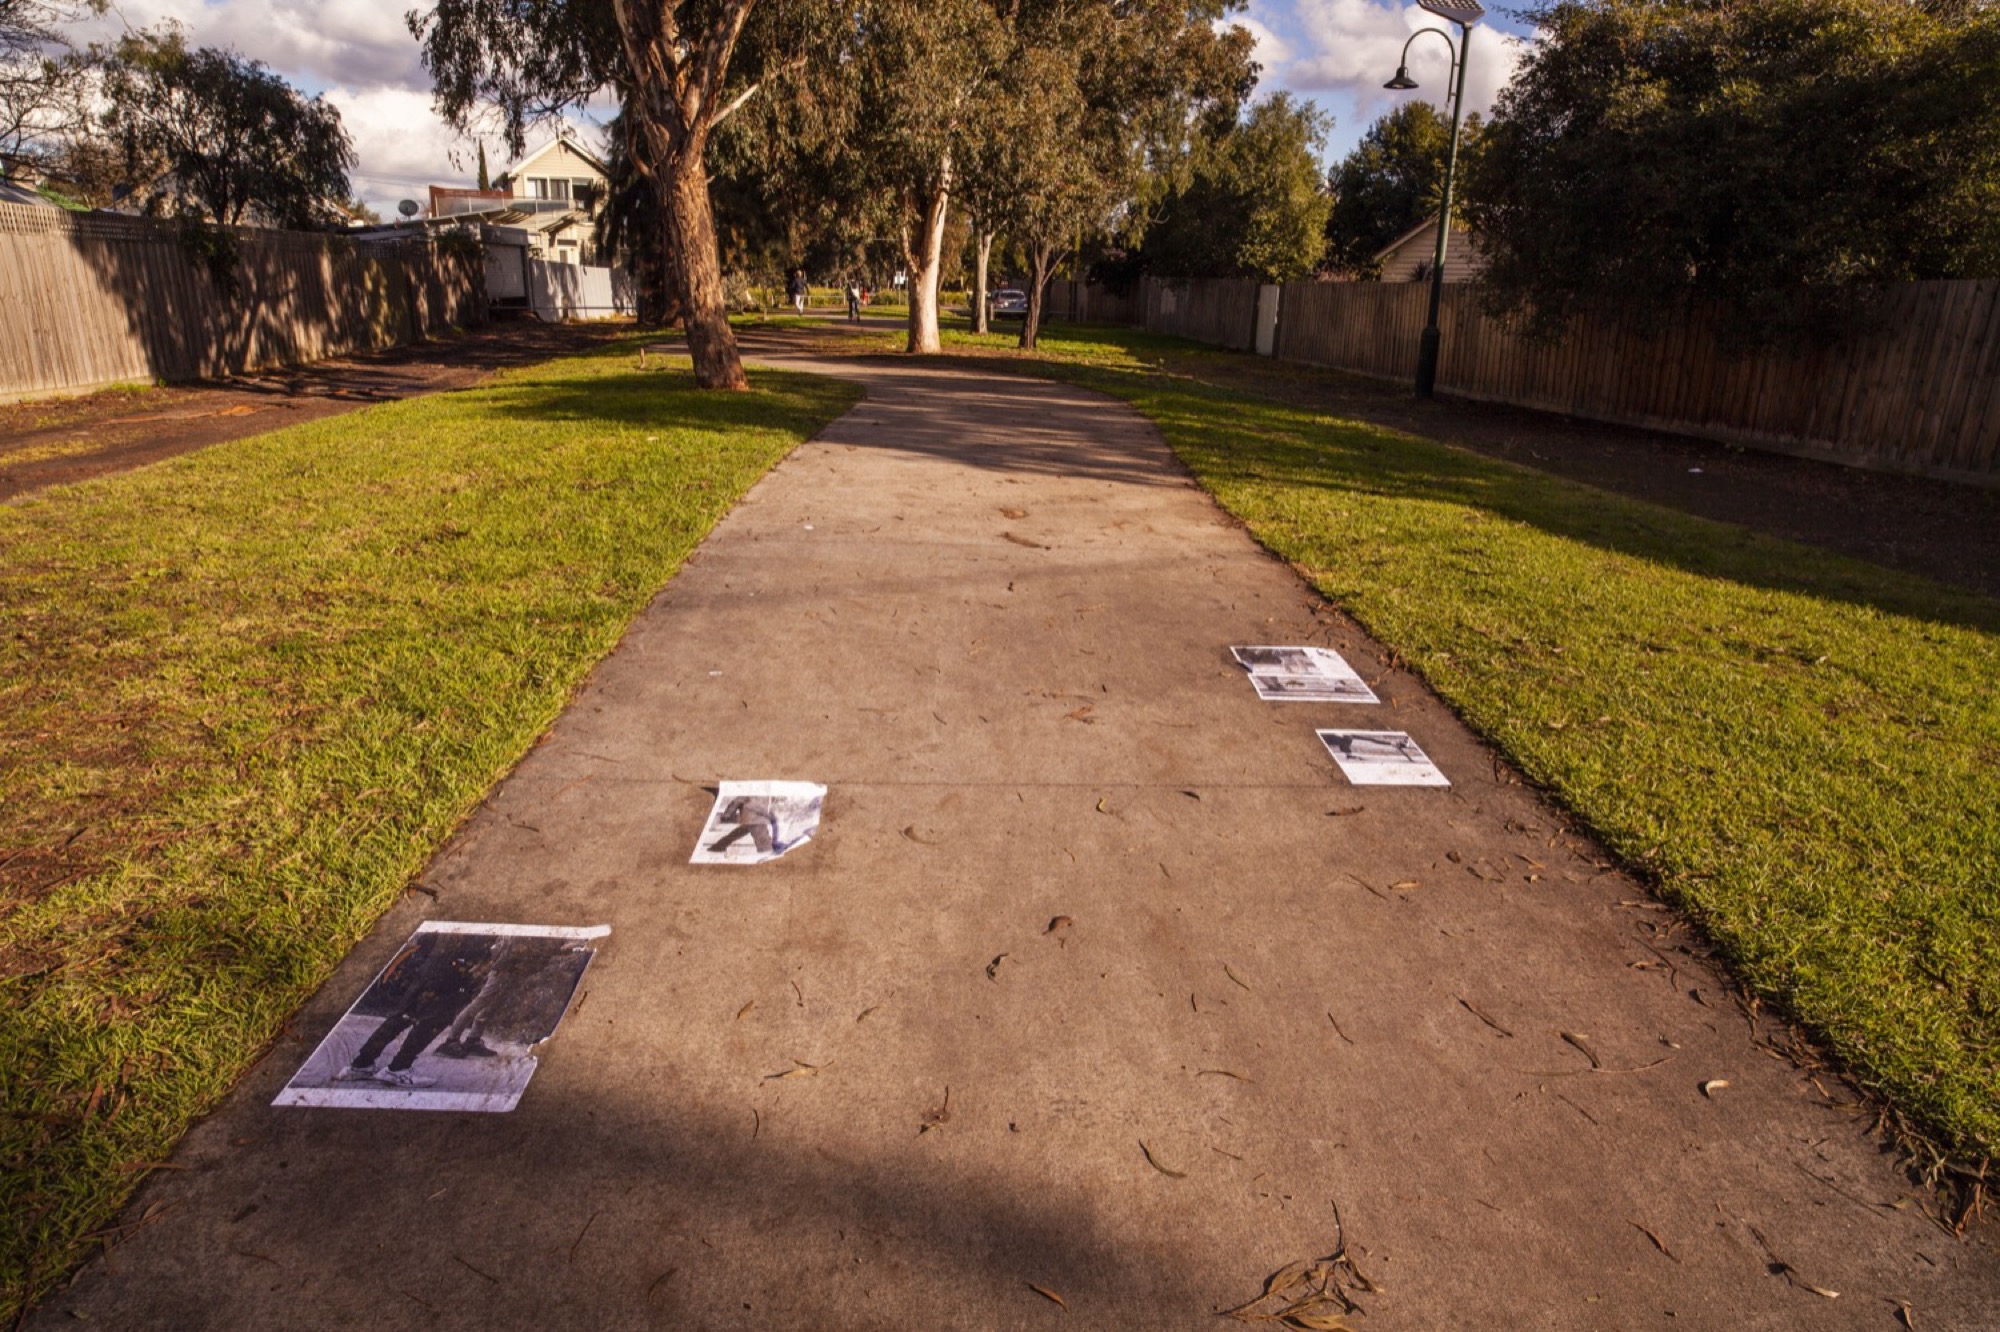 Isabella Darcy, <em>Moodboard #21 (paste-up)</em>, 2021, On the path. Photo: Naveed Farro